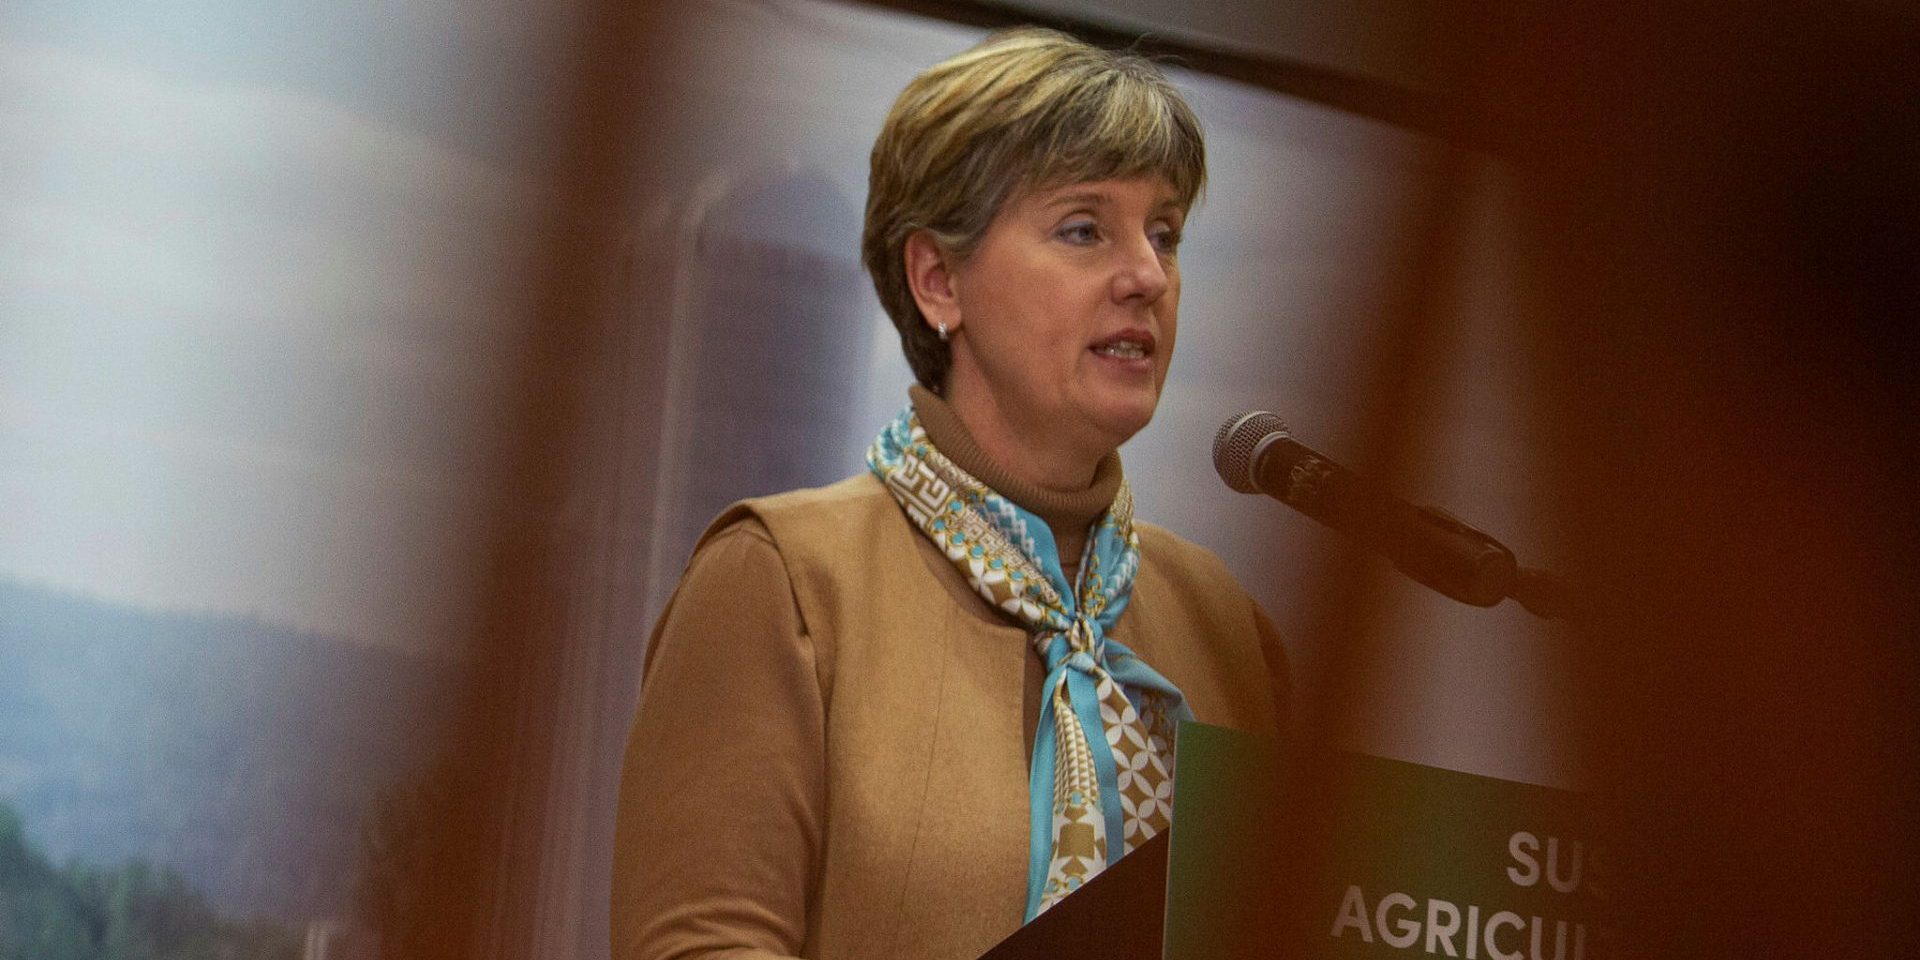 Minister of Agriculture and Agri-food Marie-Claude Bibeau, holds a press conference in Ottawa on  Dec. 12, 2022, to announce the launch of consultations for development of a sustainable agriculture strategy. The Hill Times photograph by Andrew Meade